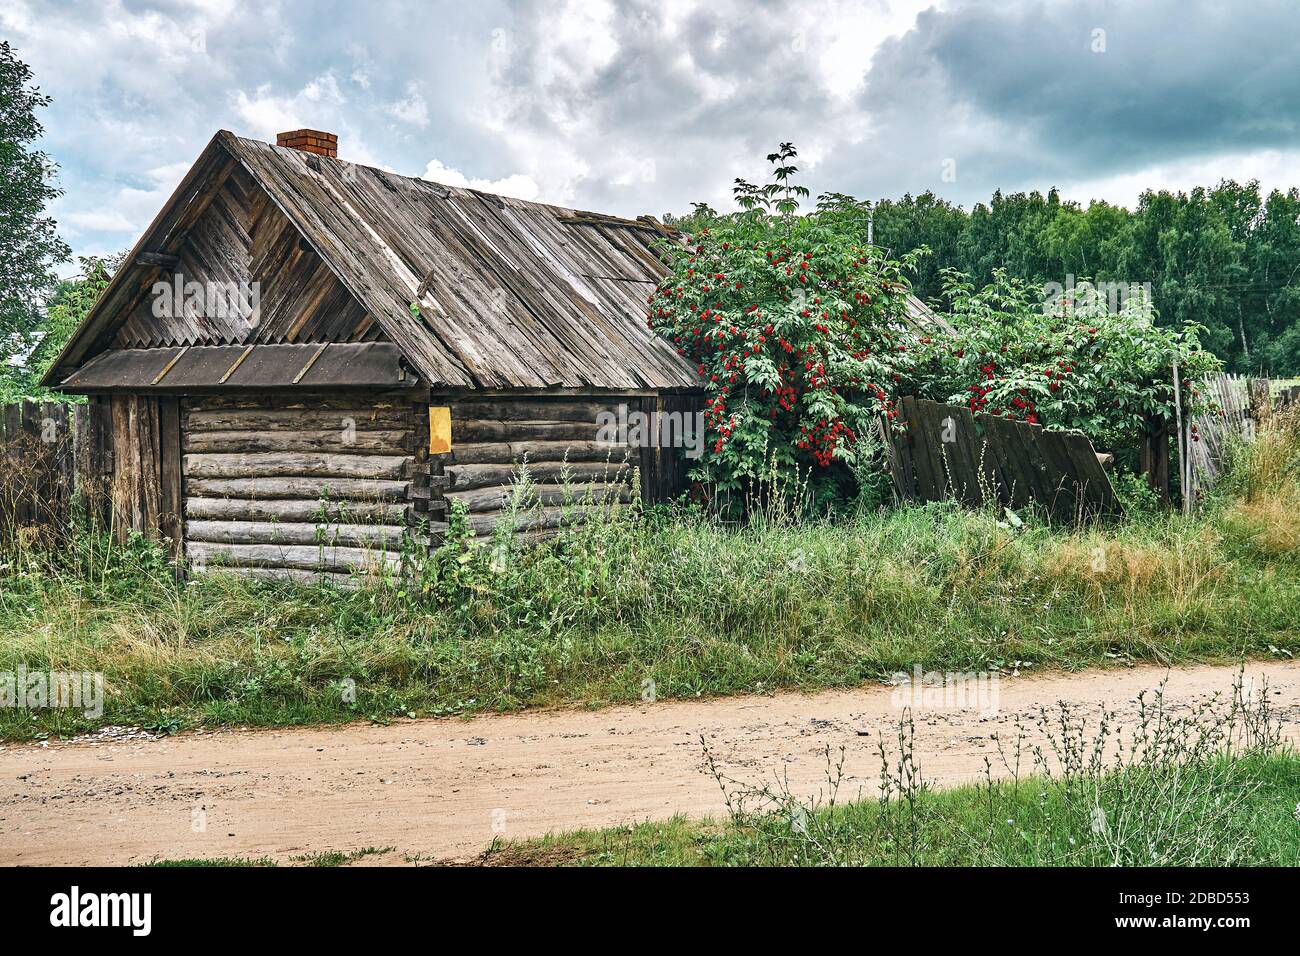 Old shack in the greenery against a gloomy sky. Abandoned old log house in countryside Stock Photo